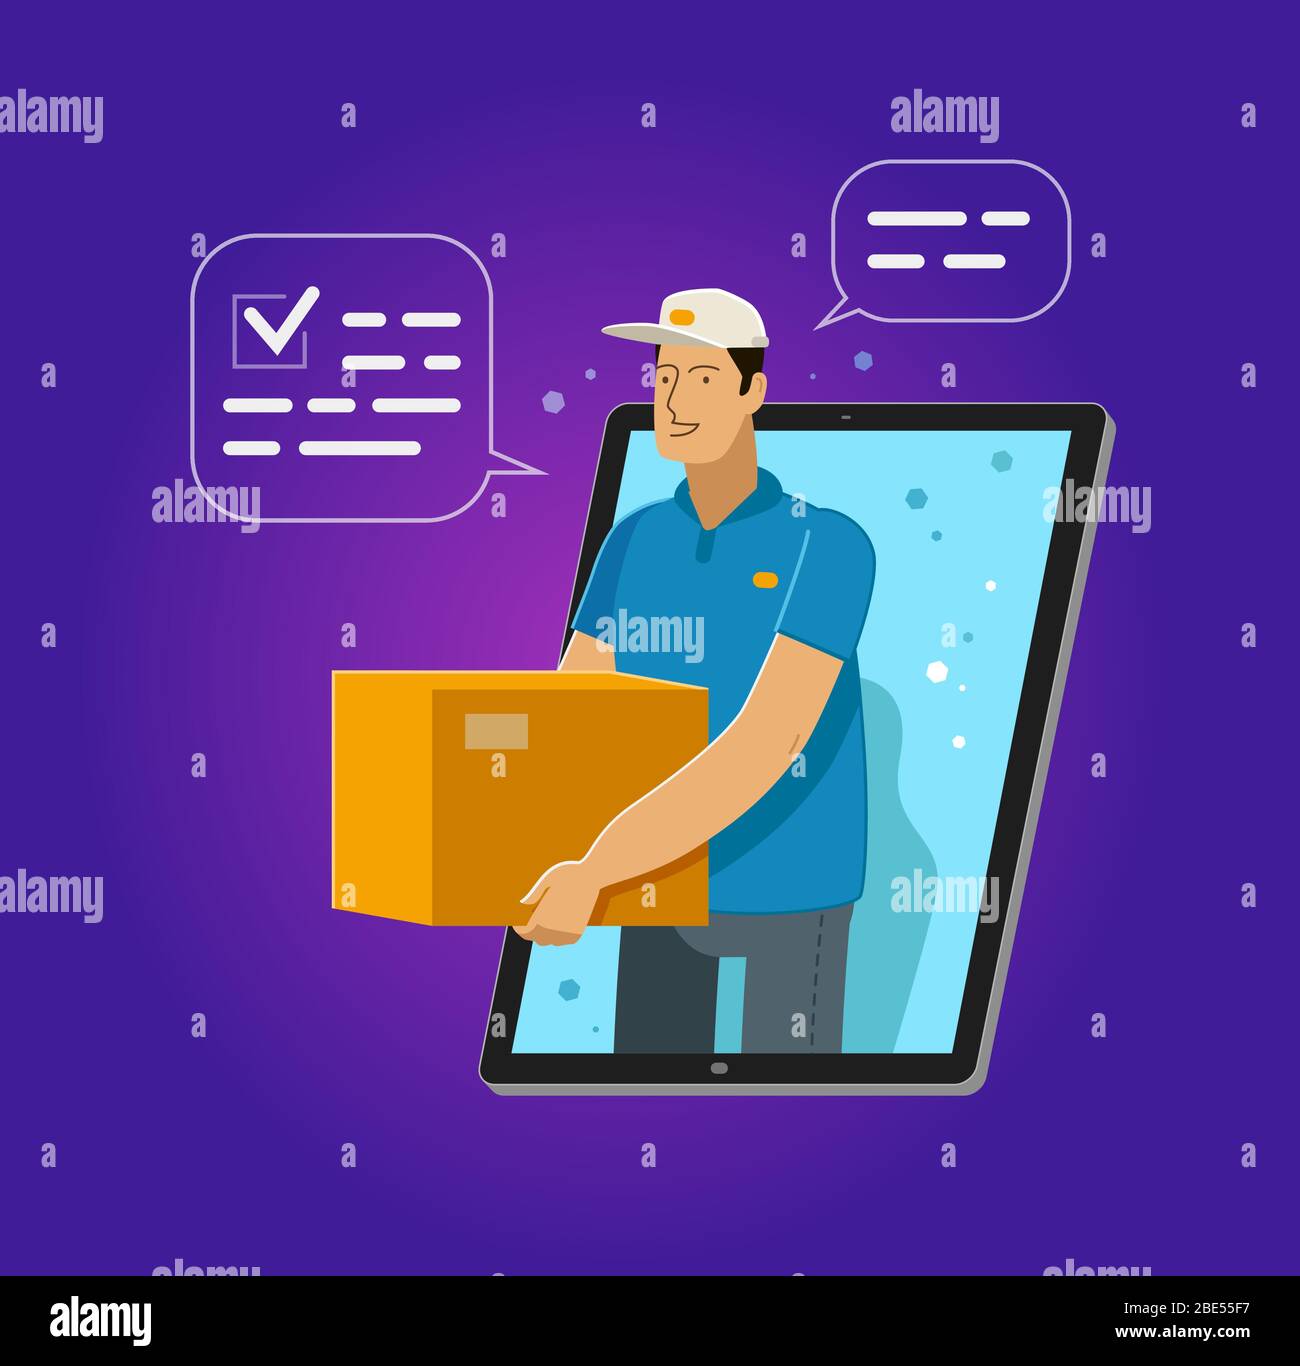 Delivery issued through web application on tablet. Vector illustration Stock Vector